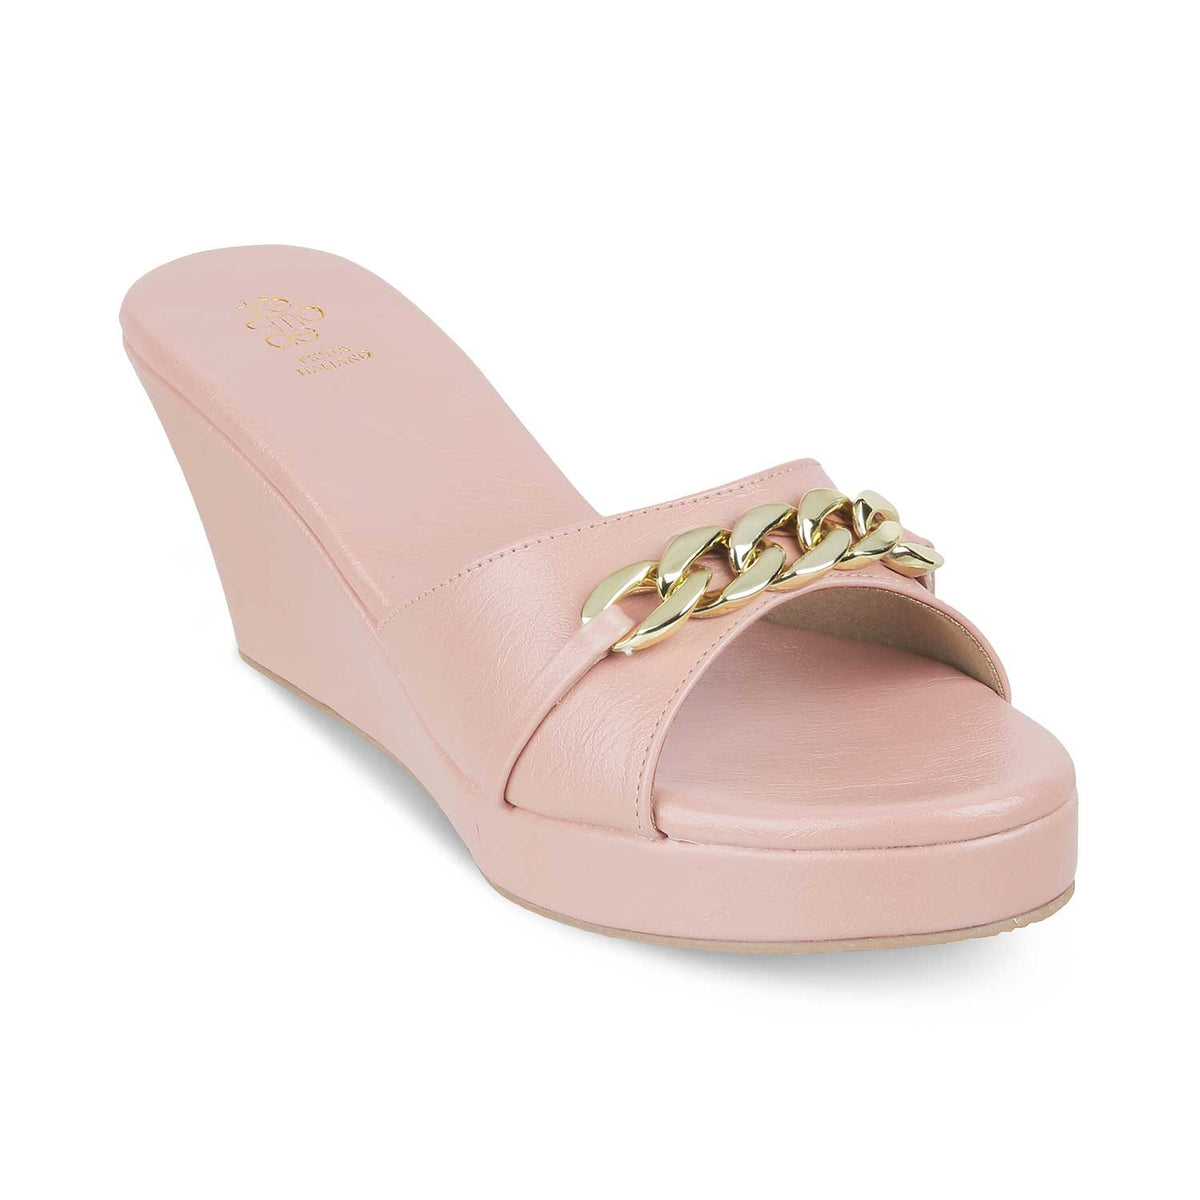 The Chain Pink Women's Dress Wedge Sandals Tresmode - Tresmode